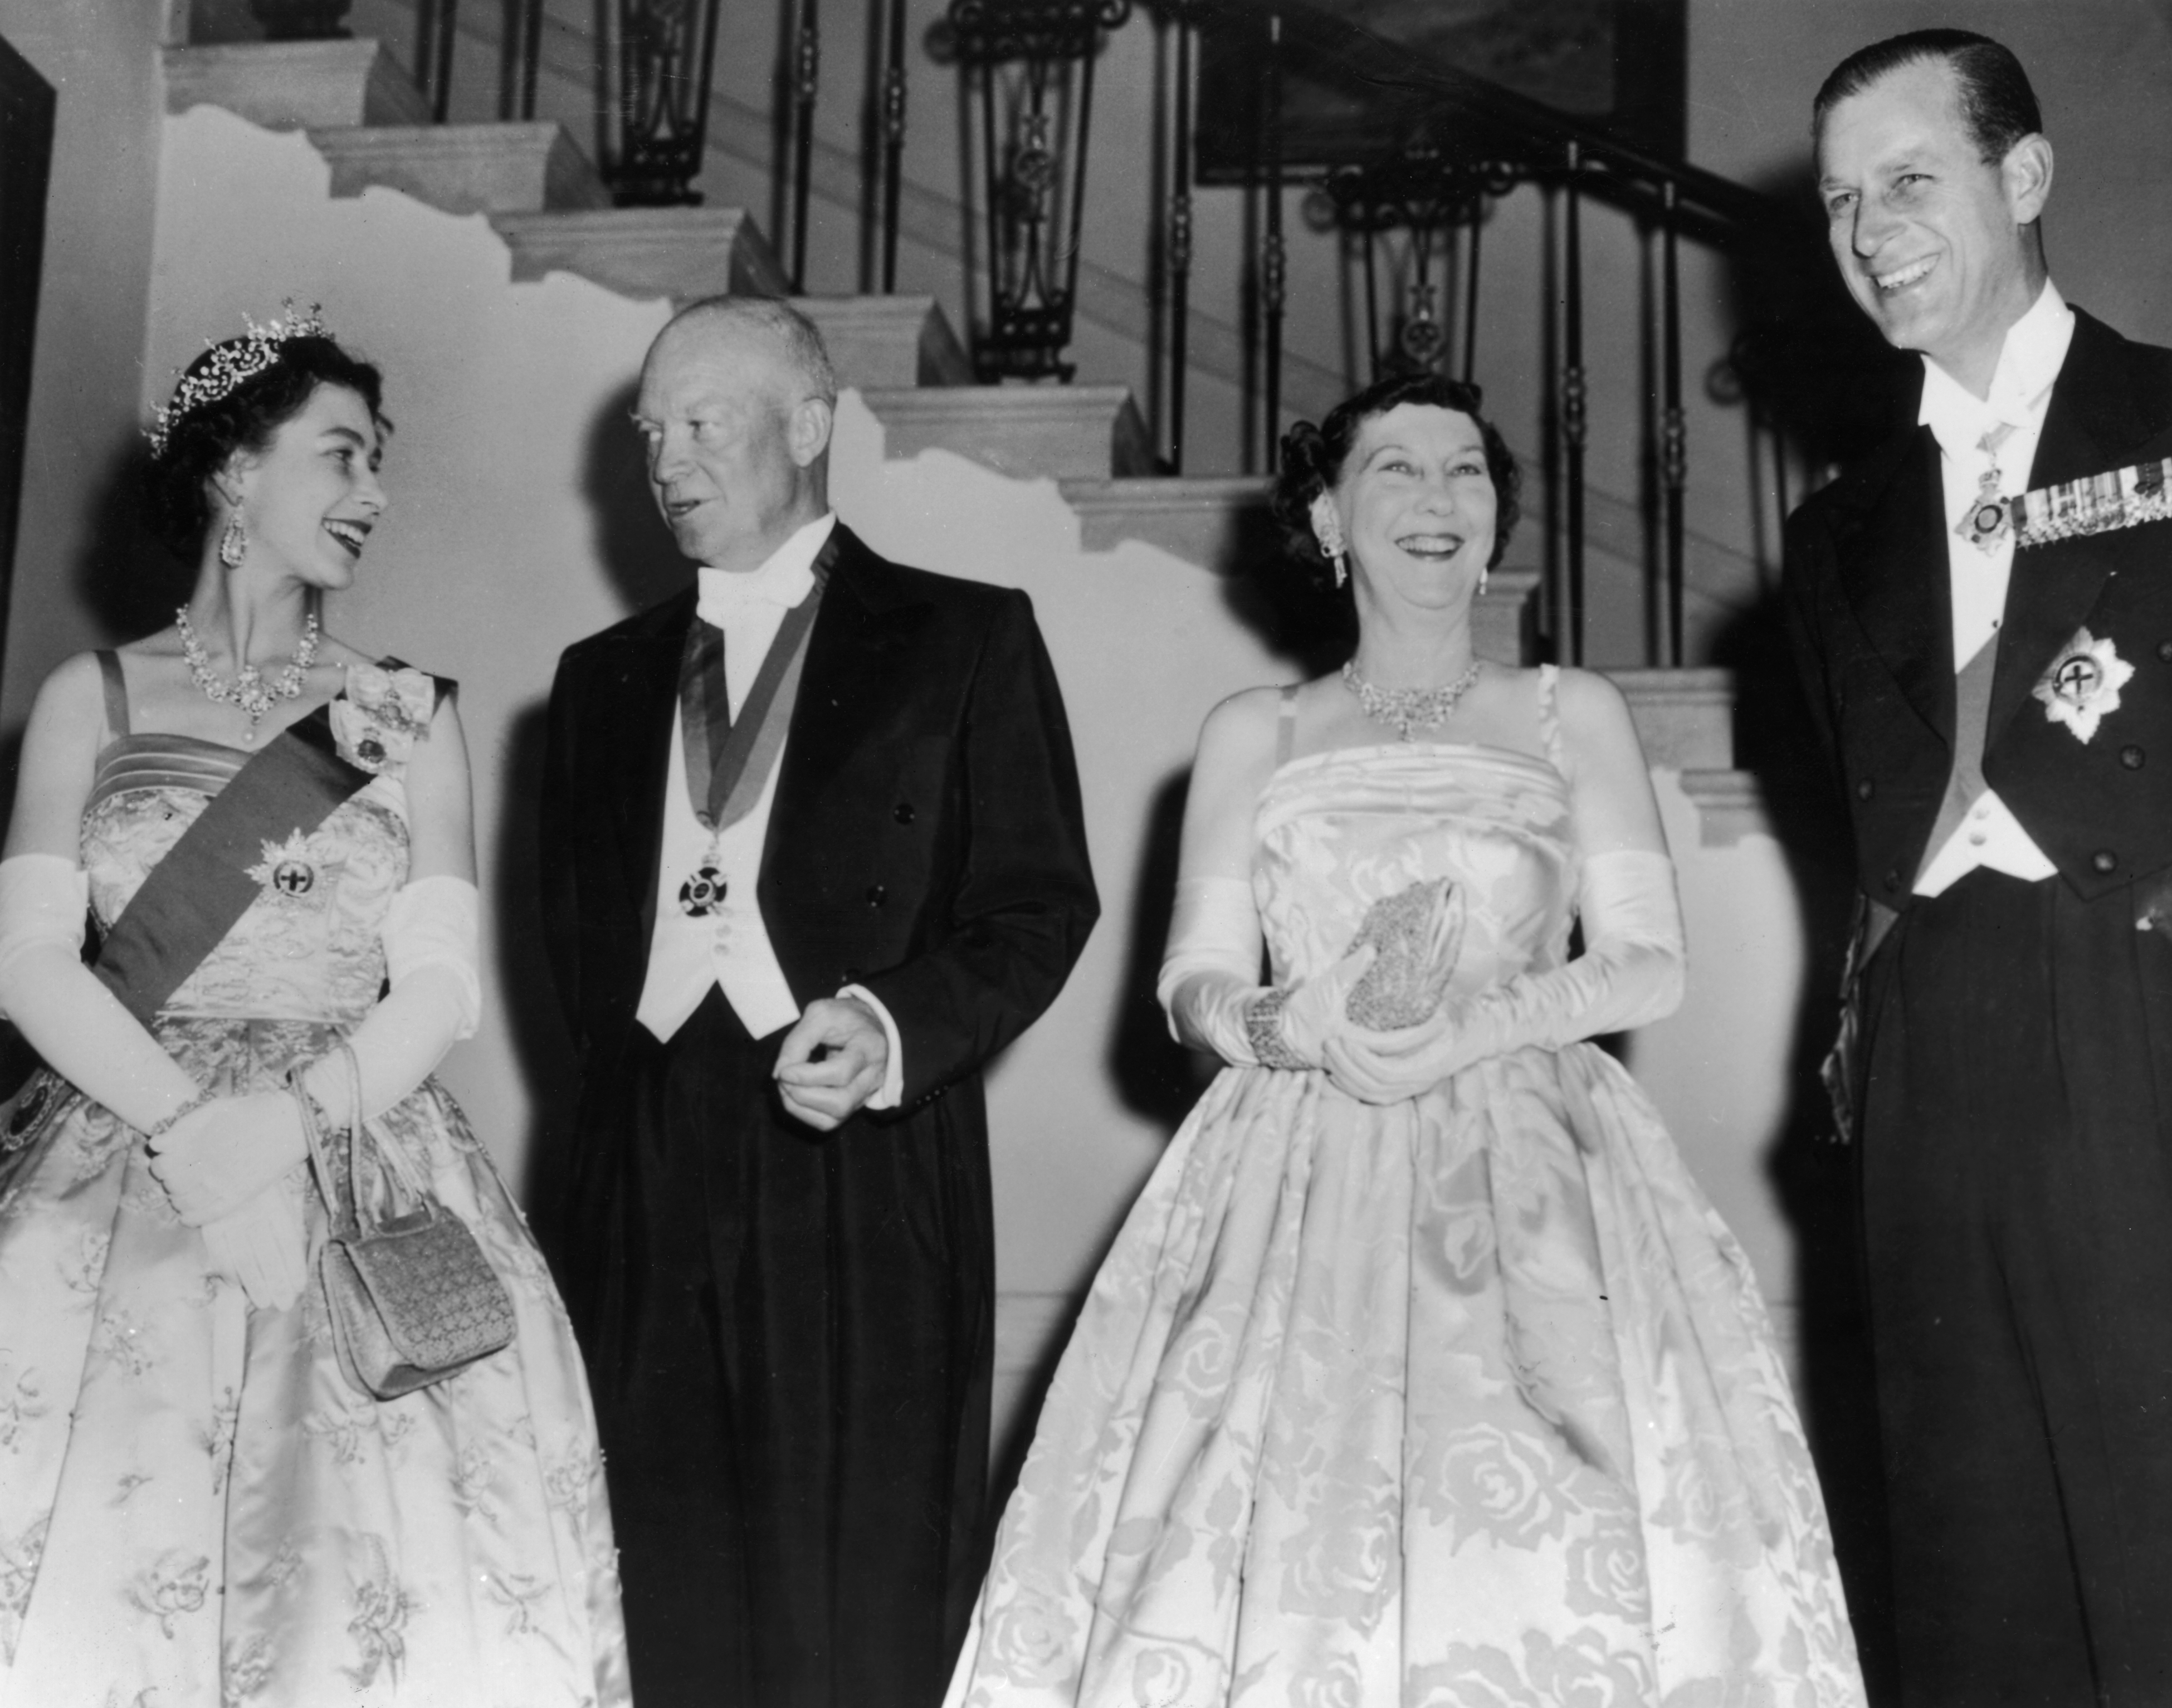 20th October 1957: Queen Elizabeth II, US president Dwight D Eisenhower (1890 - 1969) with his wife Mamie (1896 - 1979) and Prince Philip, Duke of Edinburgh at a White House State banquet. (Keystone/Getty Images)